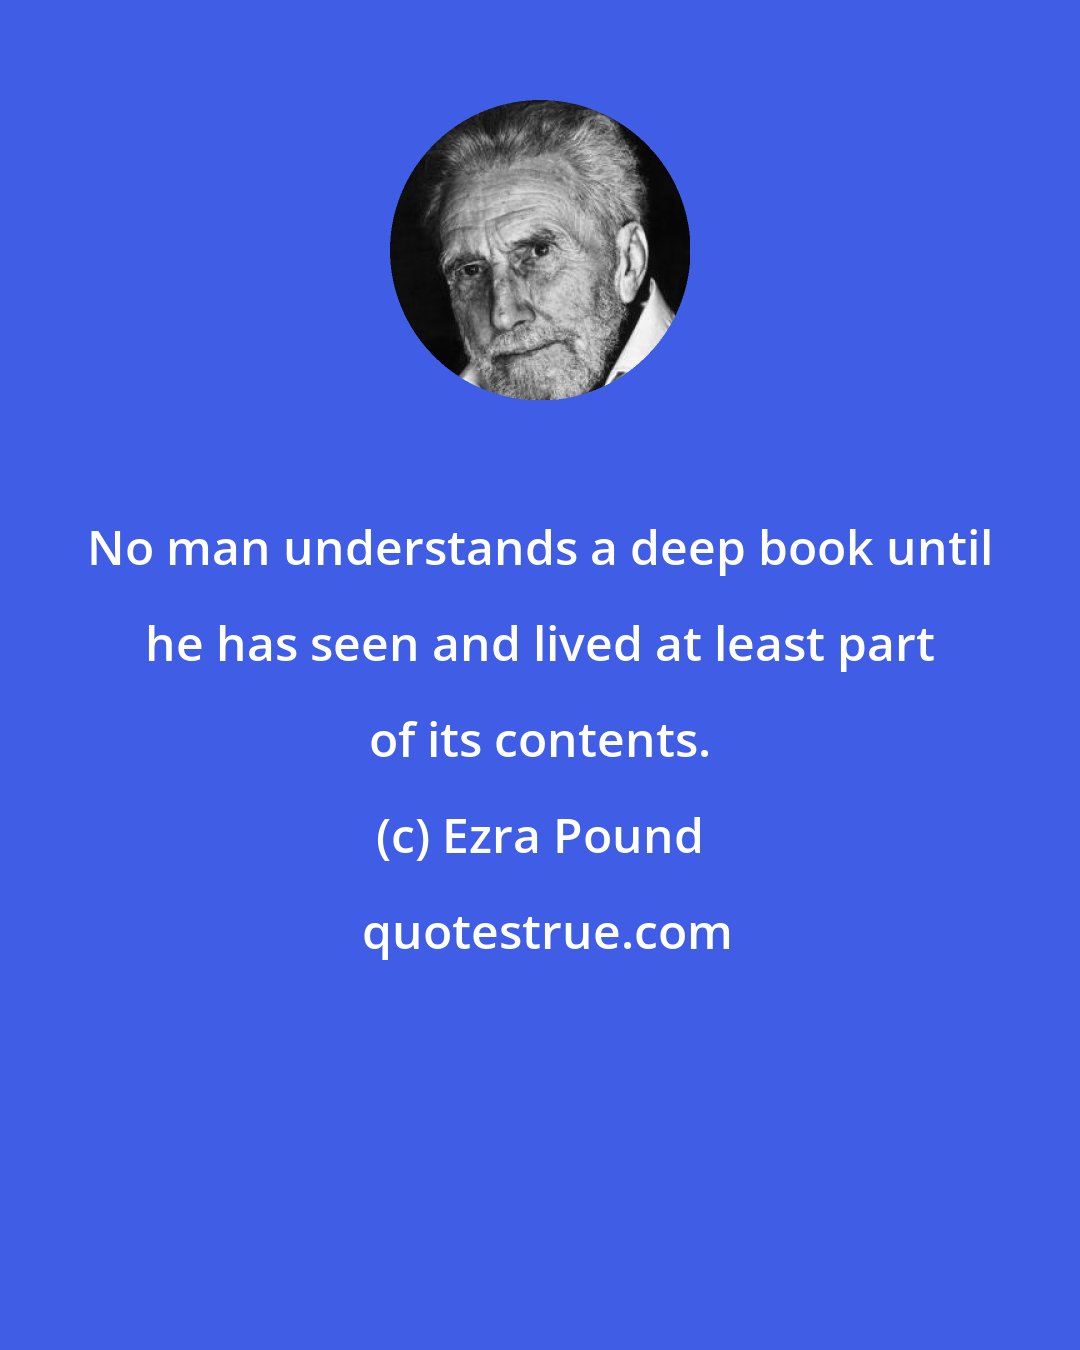 Ezra Pound: No man understands a deep book until he has seen and lived at least part of its contents.